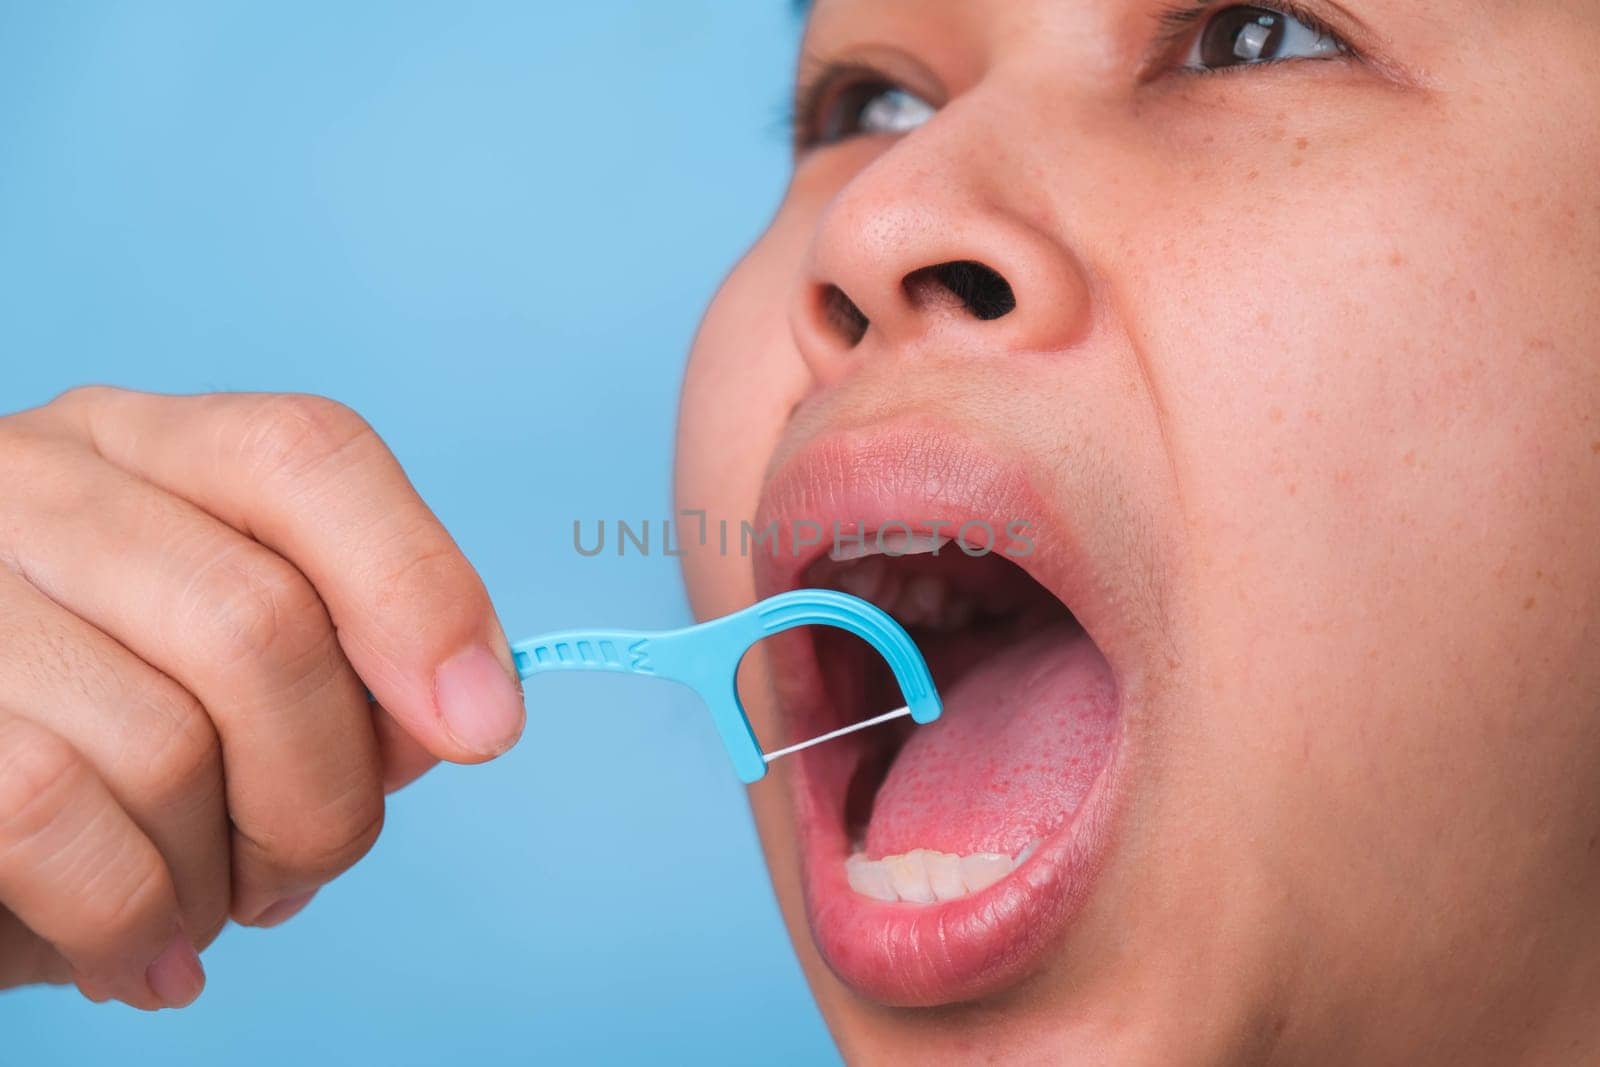 Close-up of smiling asian woman and cleaning for perfect smile. Healthy white teeth by flossing, oral health and dental care.